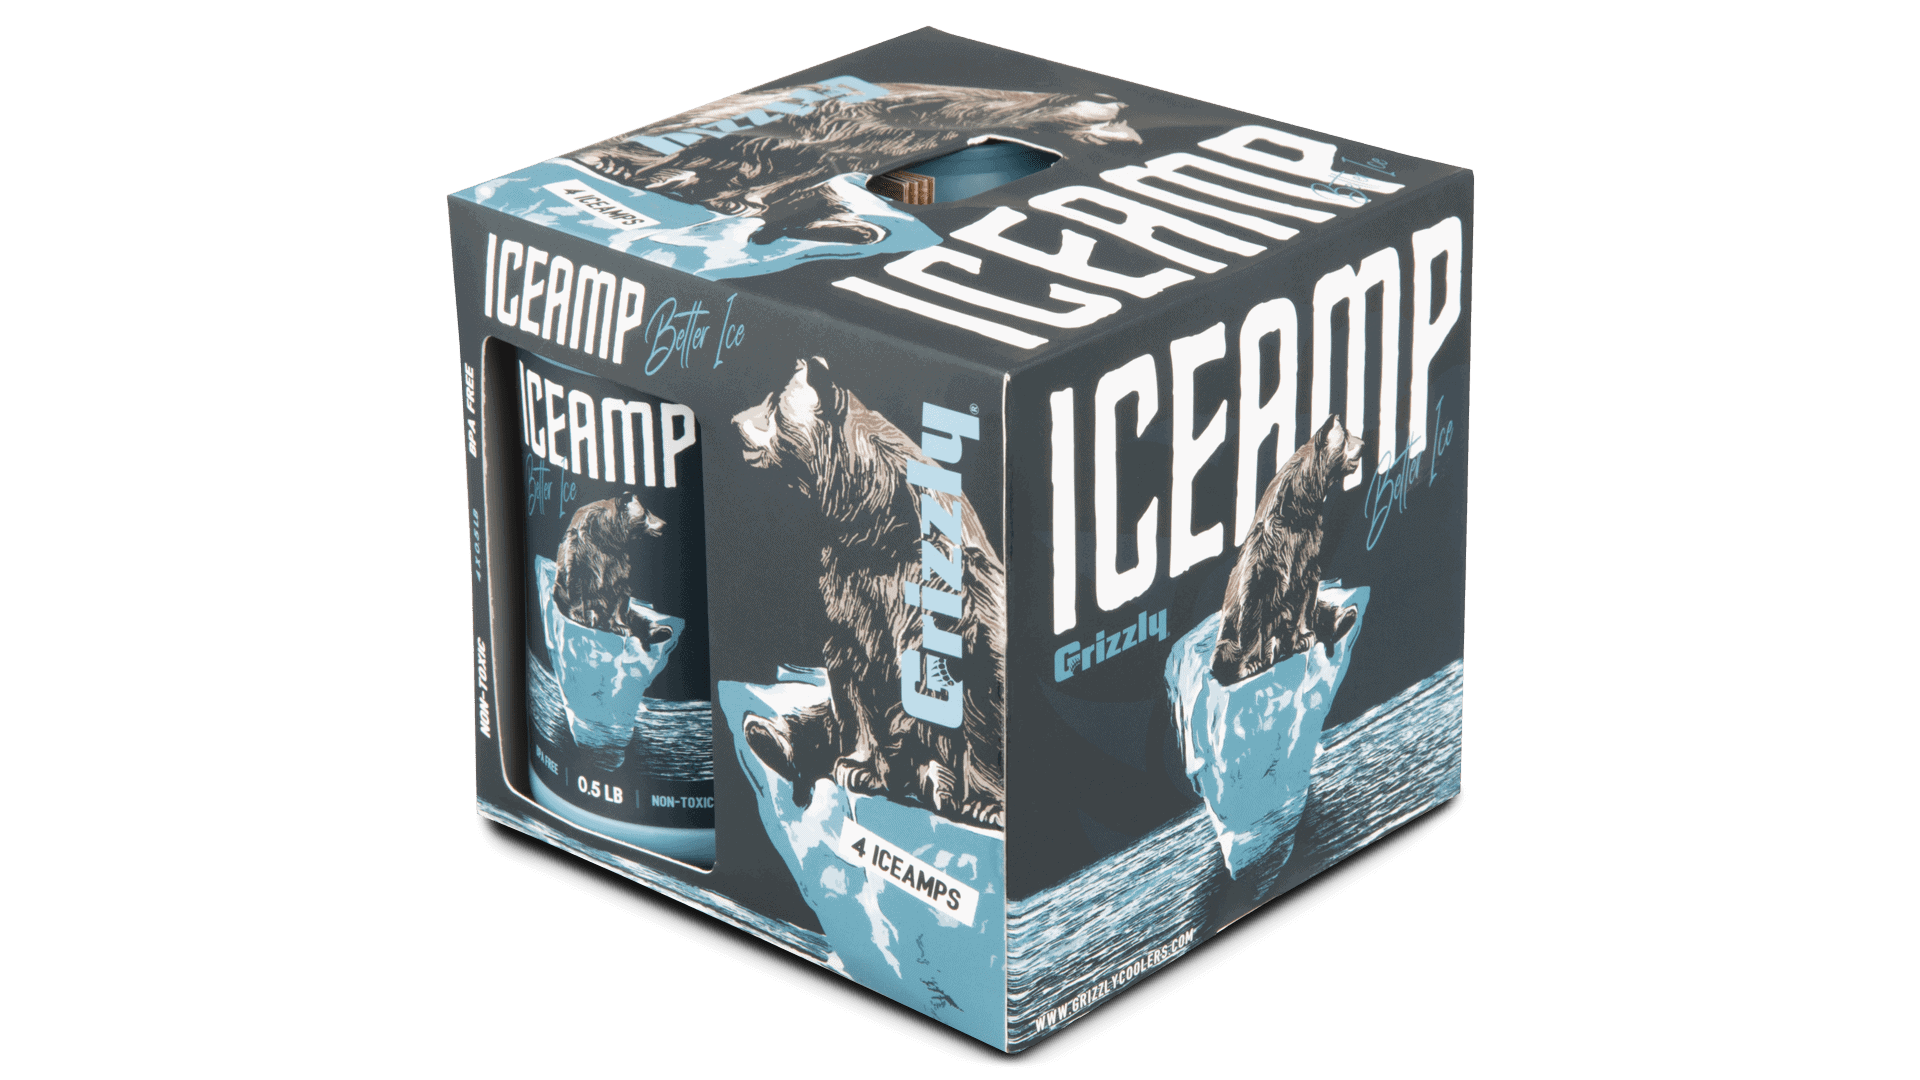 Reusable Ice packs-4 pack box of ICAMP product